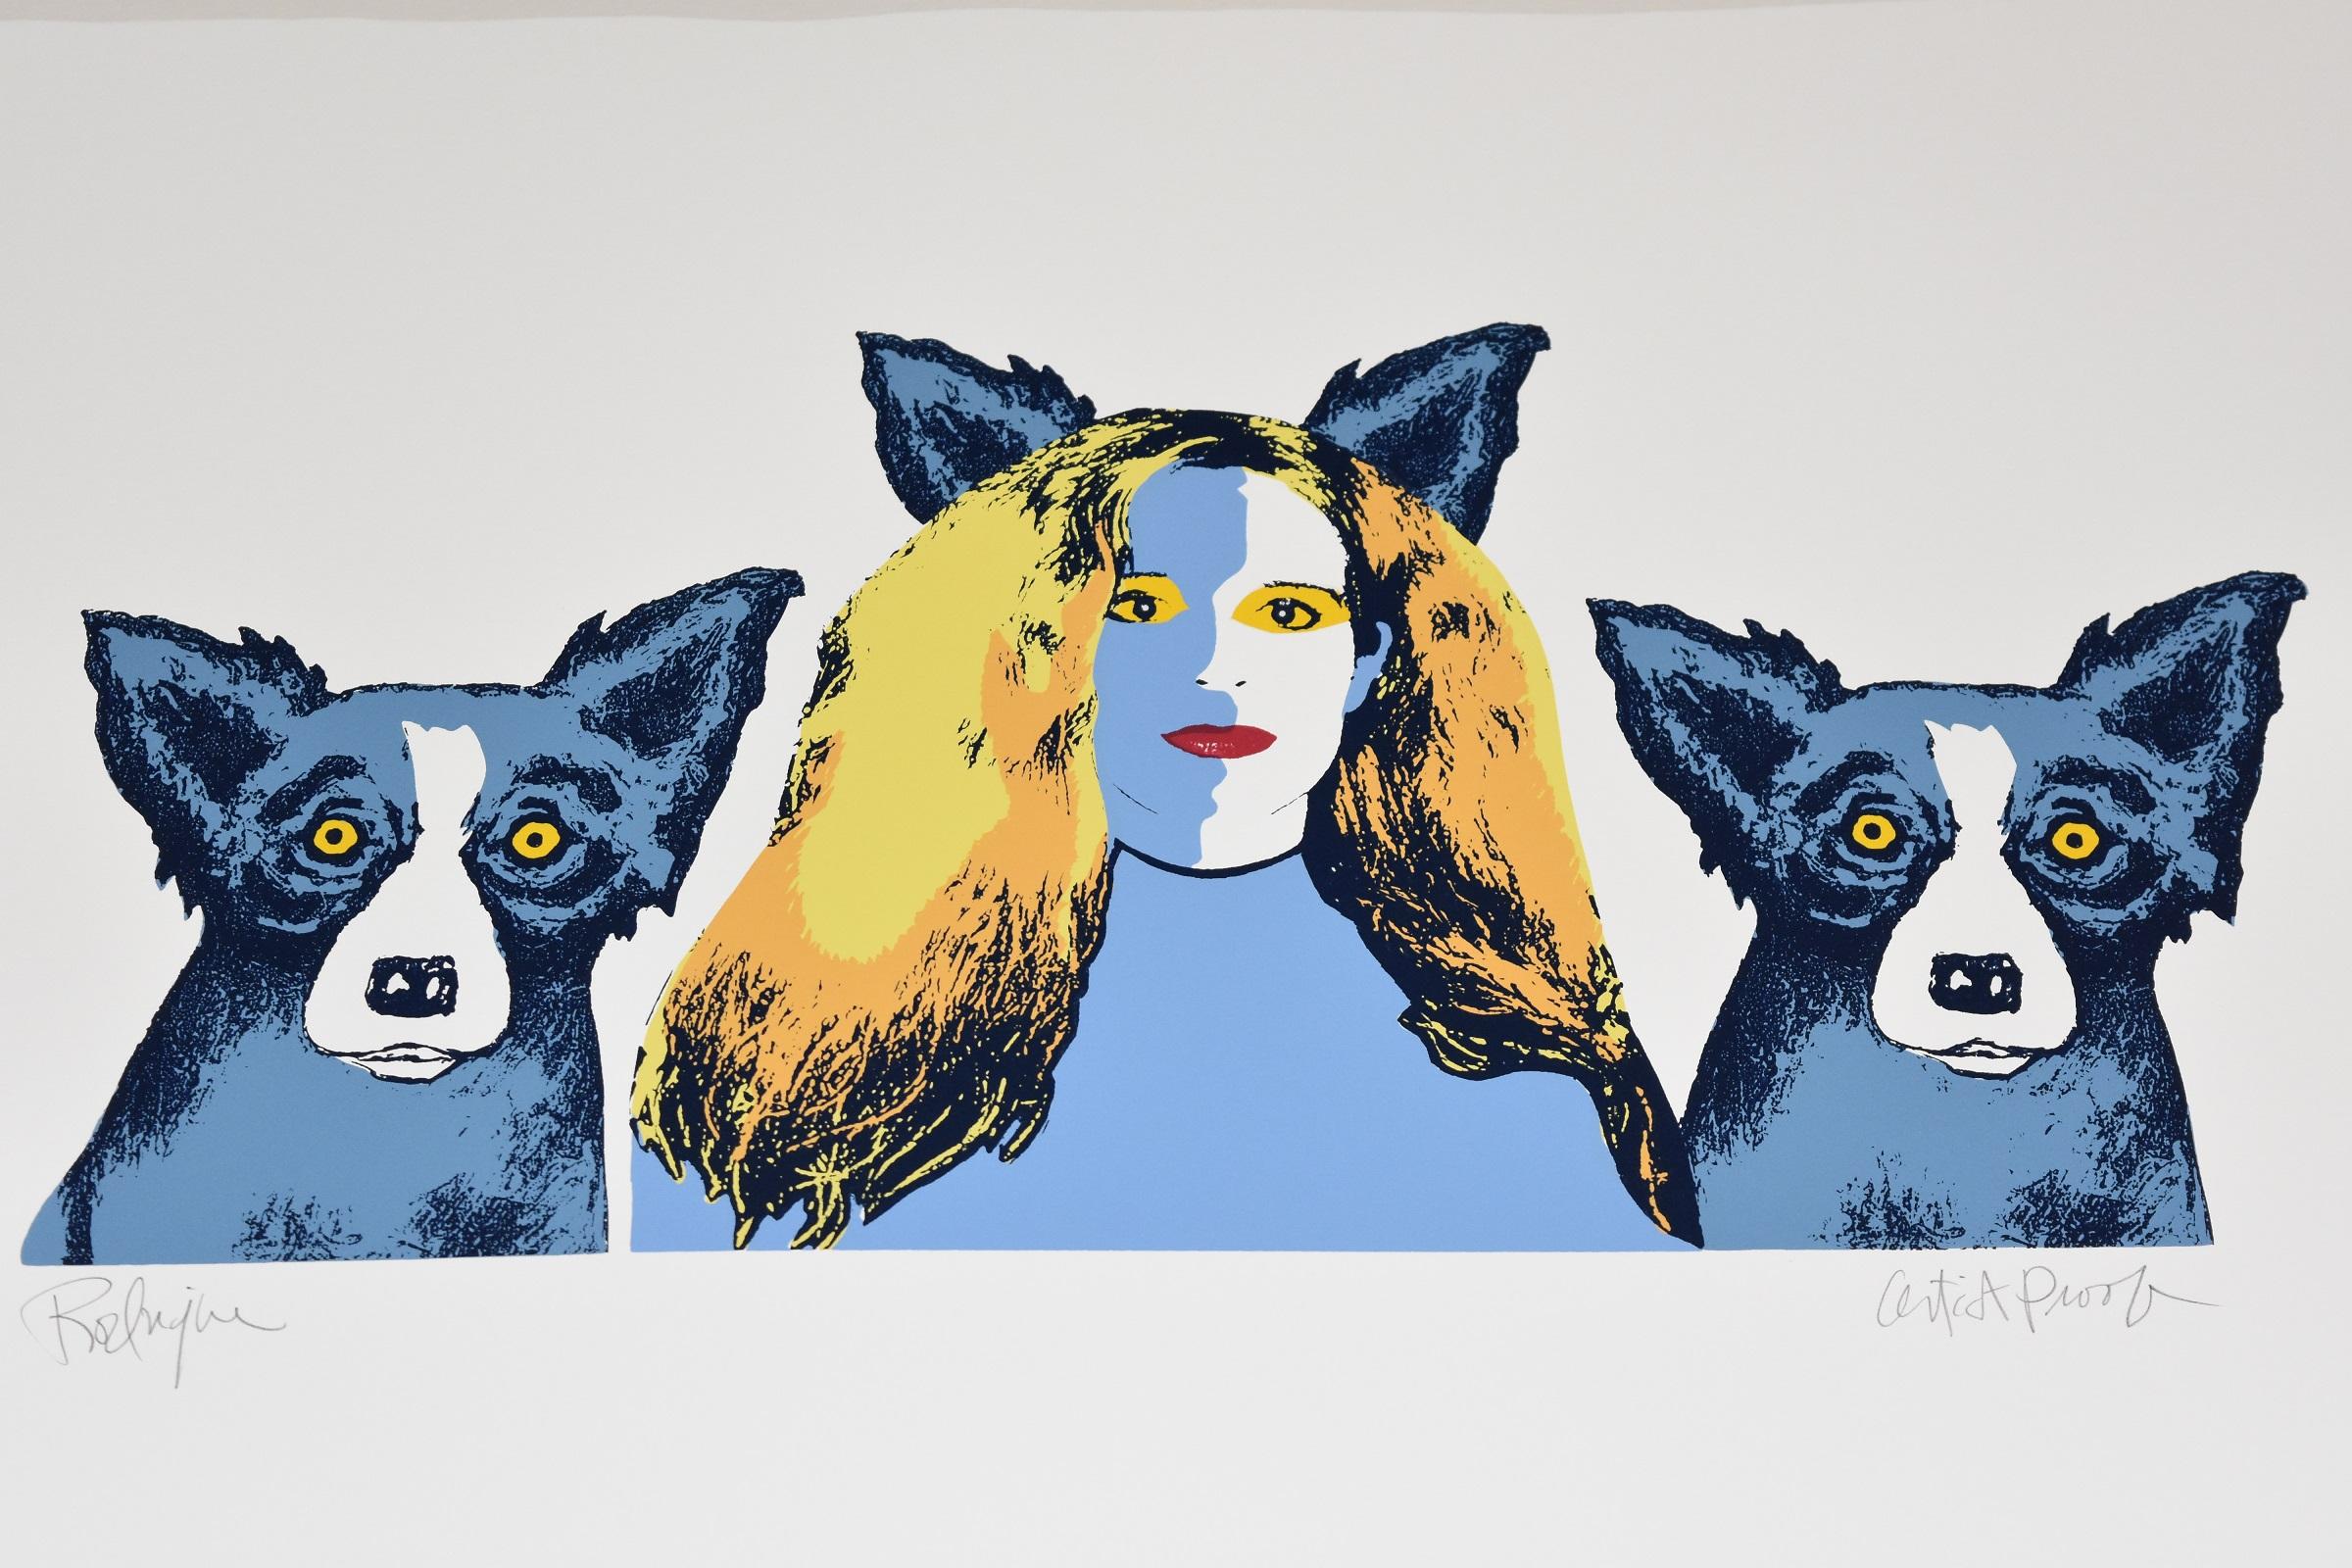 This Blue Dog work consists of a white background with a blue and white female with yellow and black hair centered between 2 blue dogs.  All 3 have soulful yellow eyes.  This pop art animal original silkscreen print on paper is hand signed by the